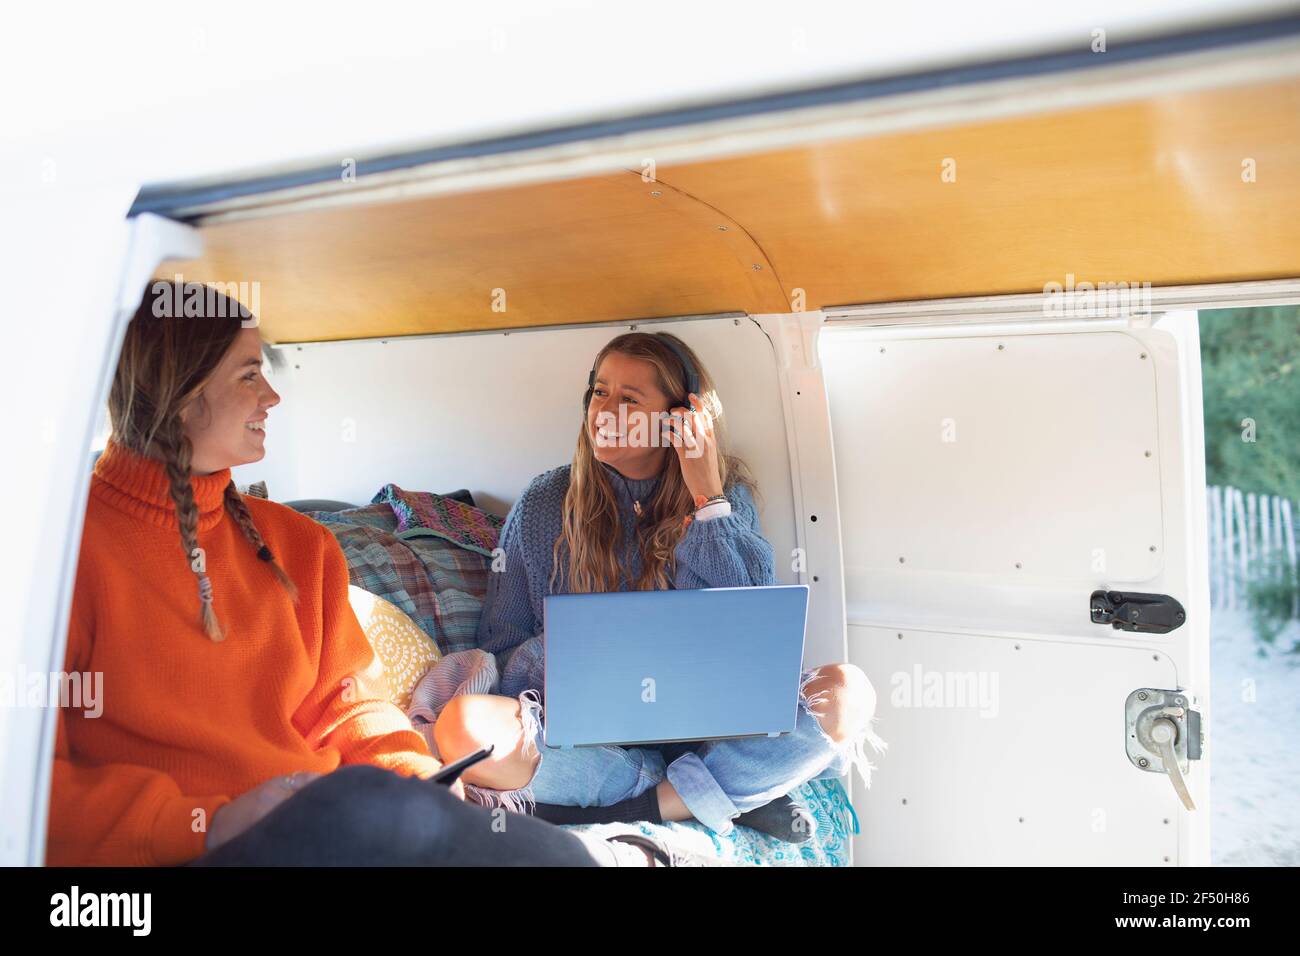 Happy young women friends using laptop and smart phone in camper van Stock Photo